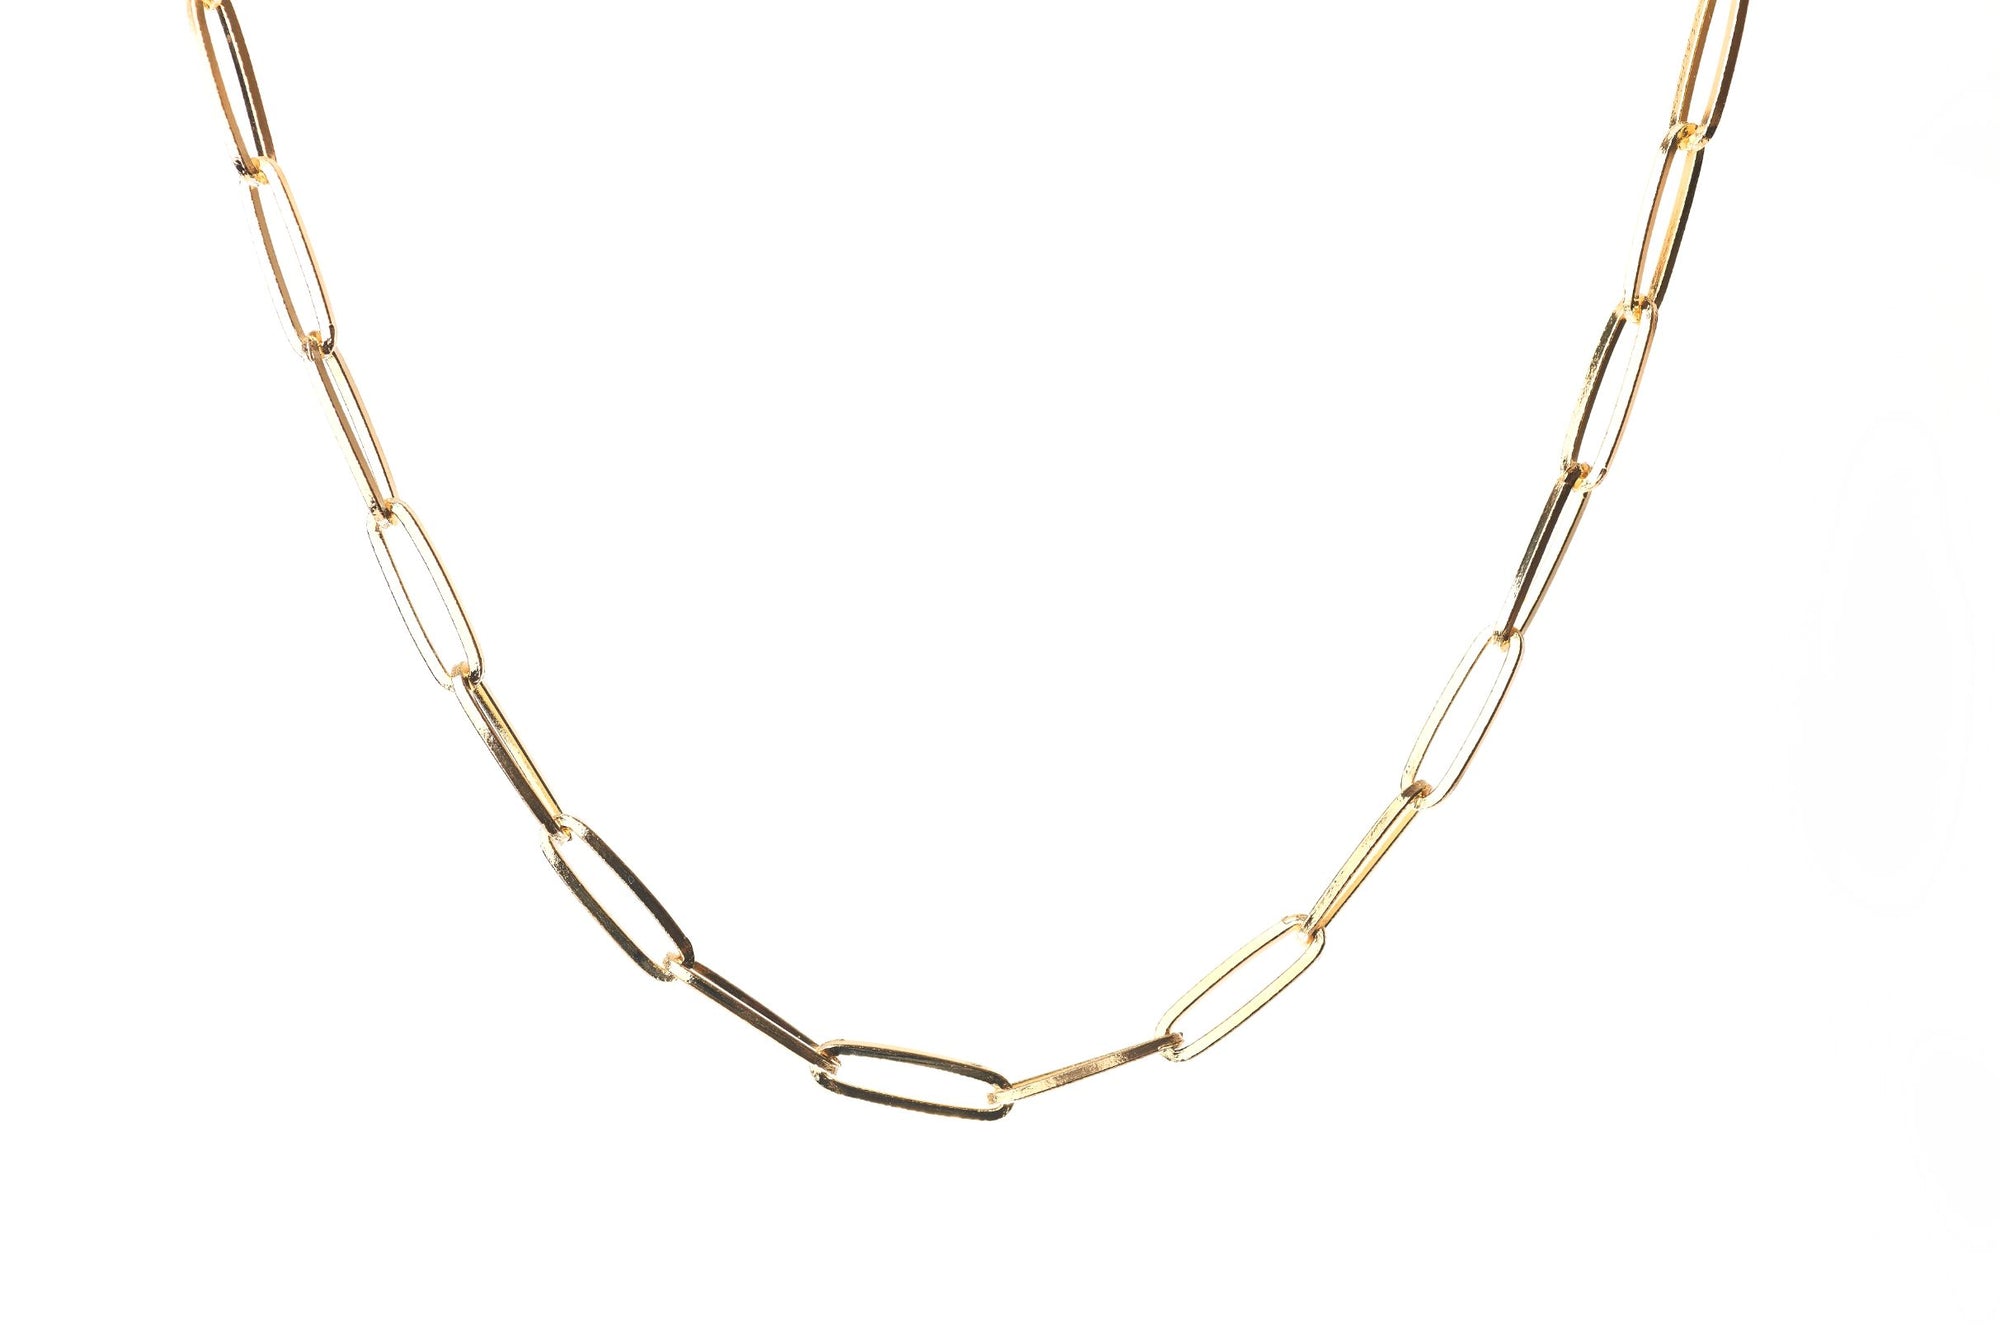 Oval Paperclip Necklace